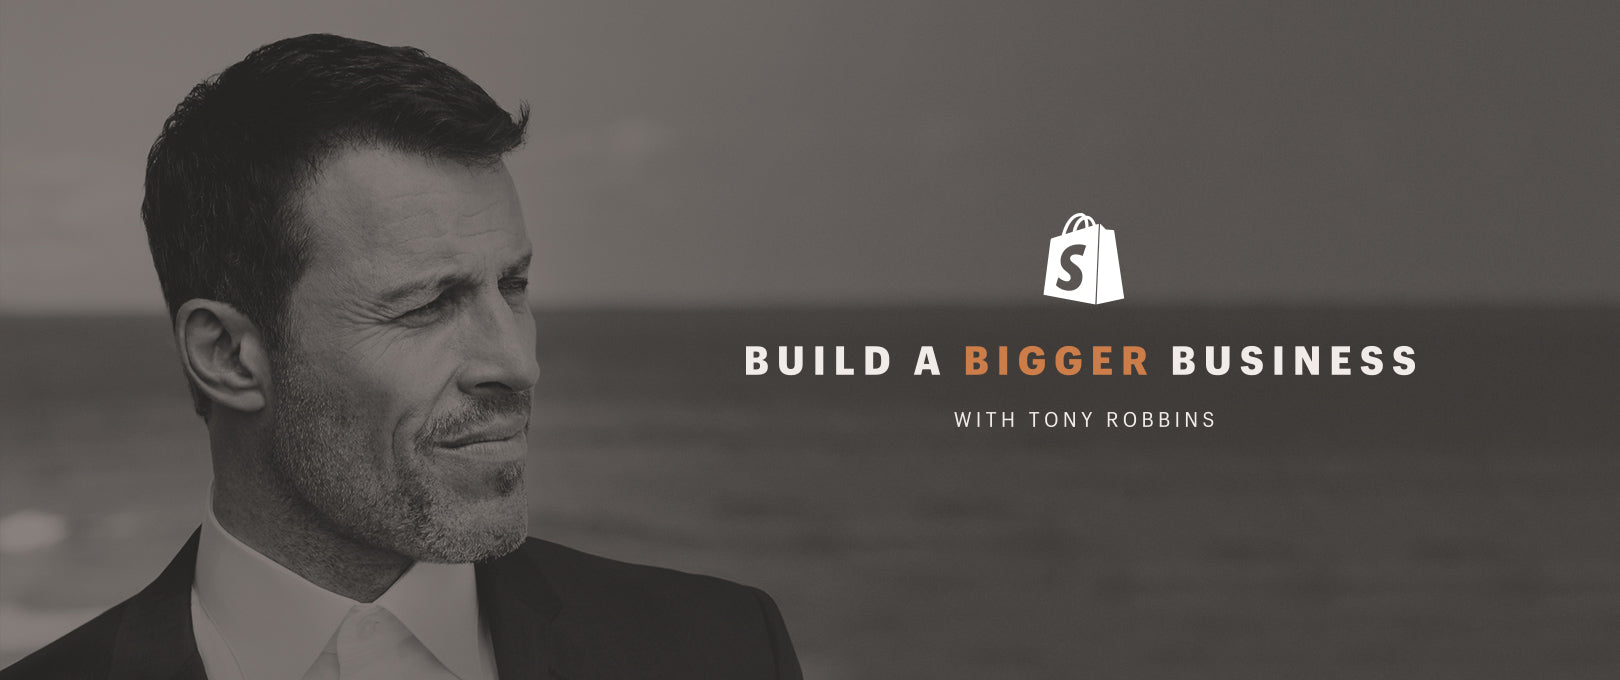 Shopify's Build a BIGGER Business Competition - Tony Robbins